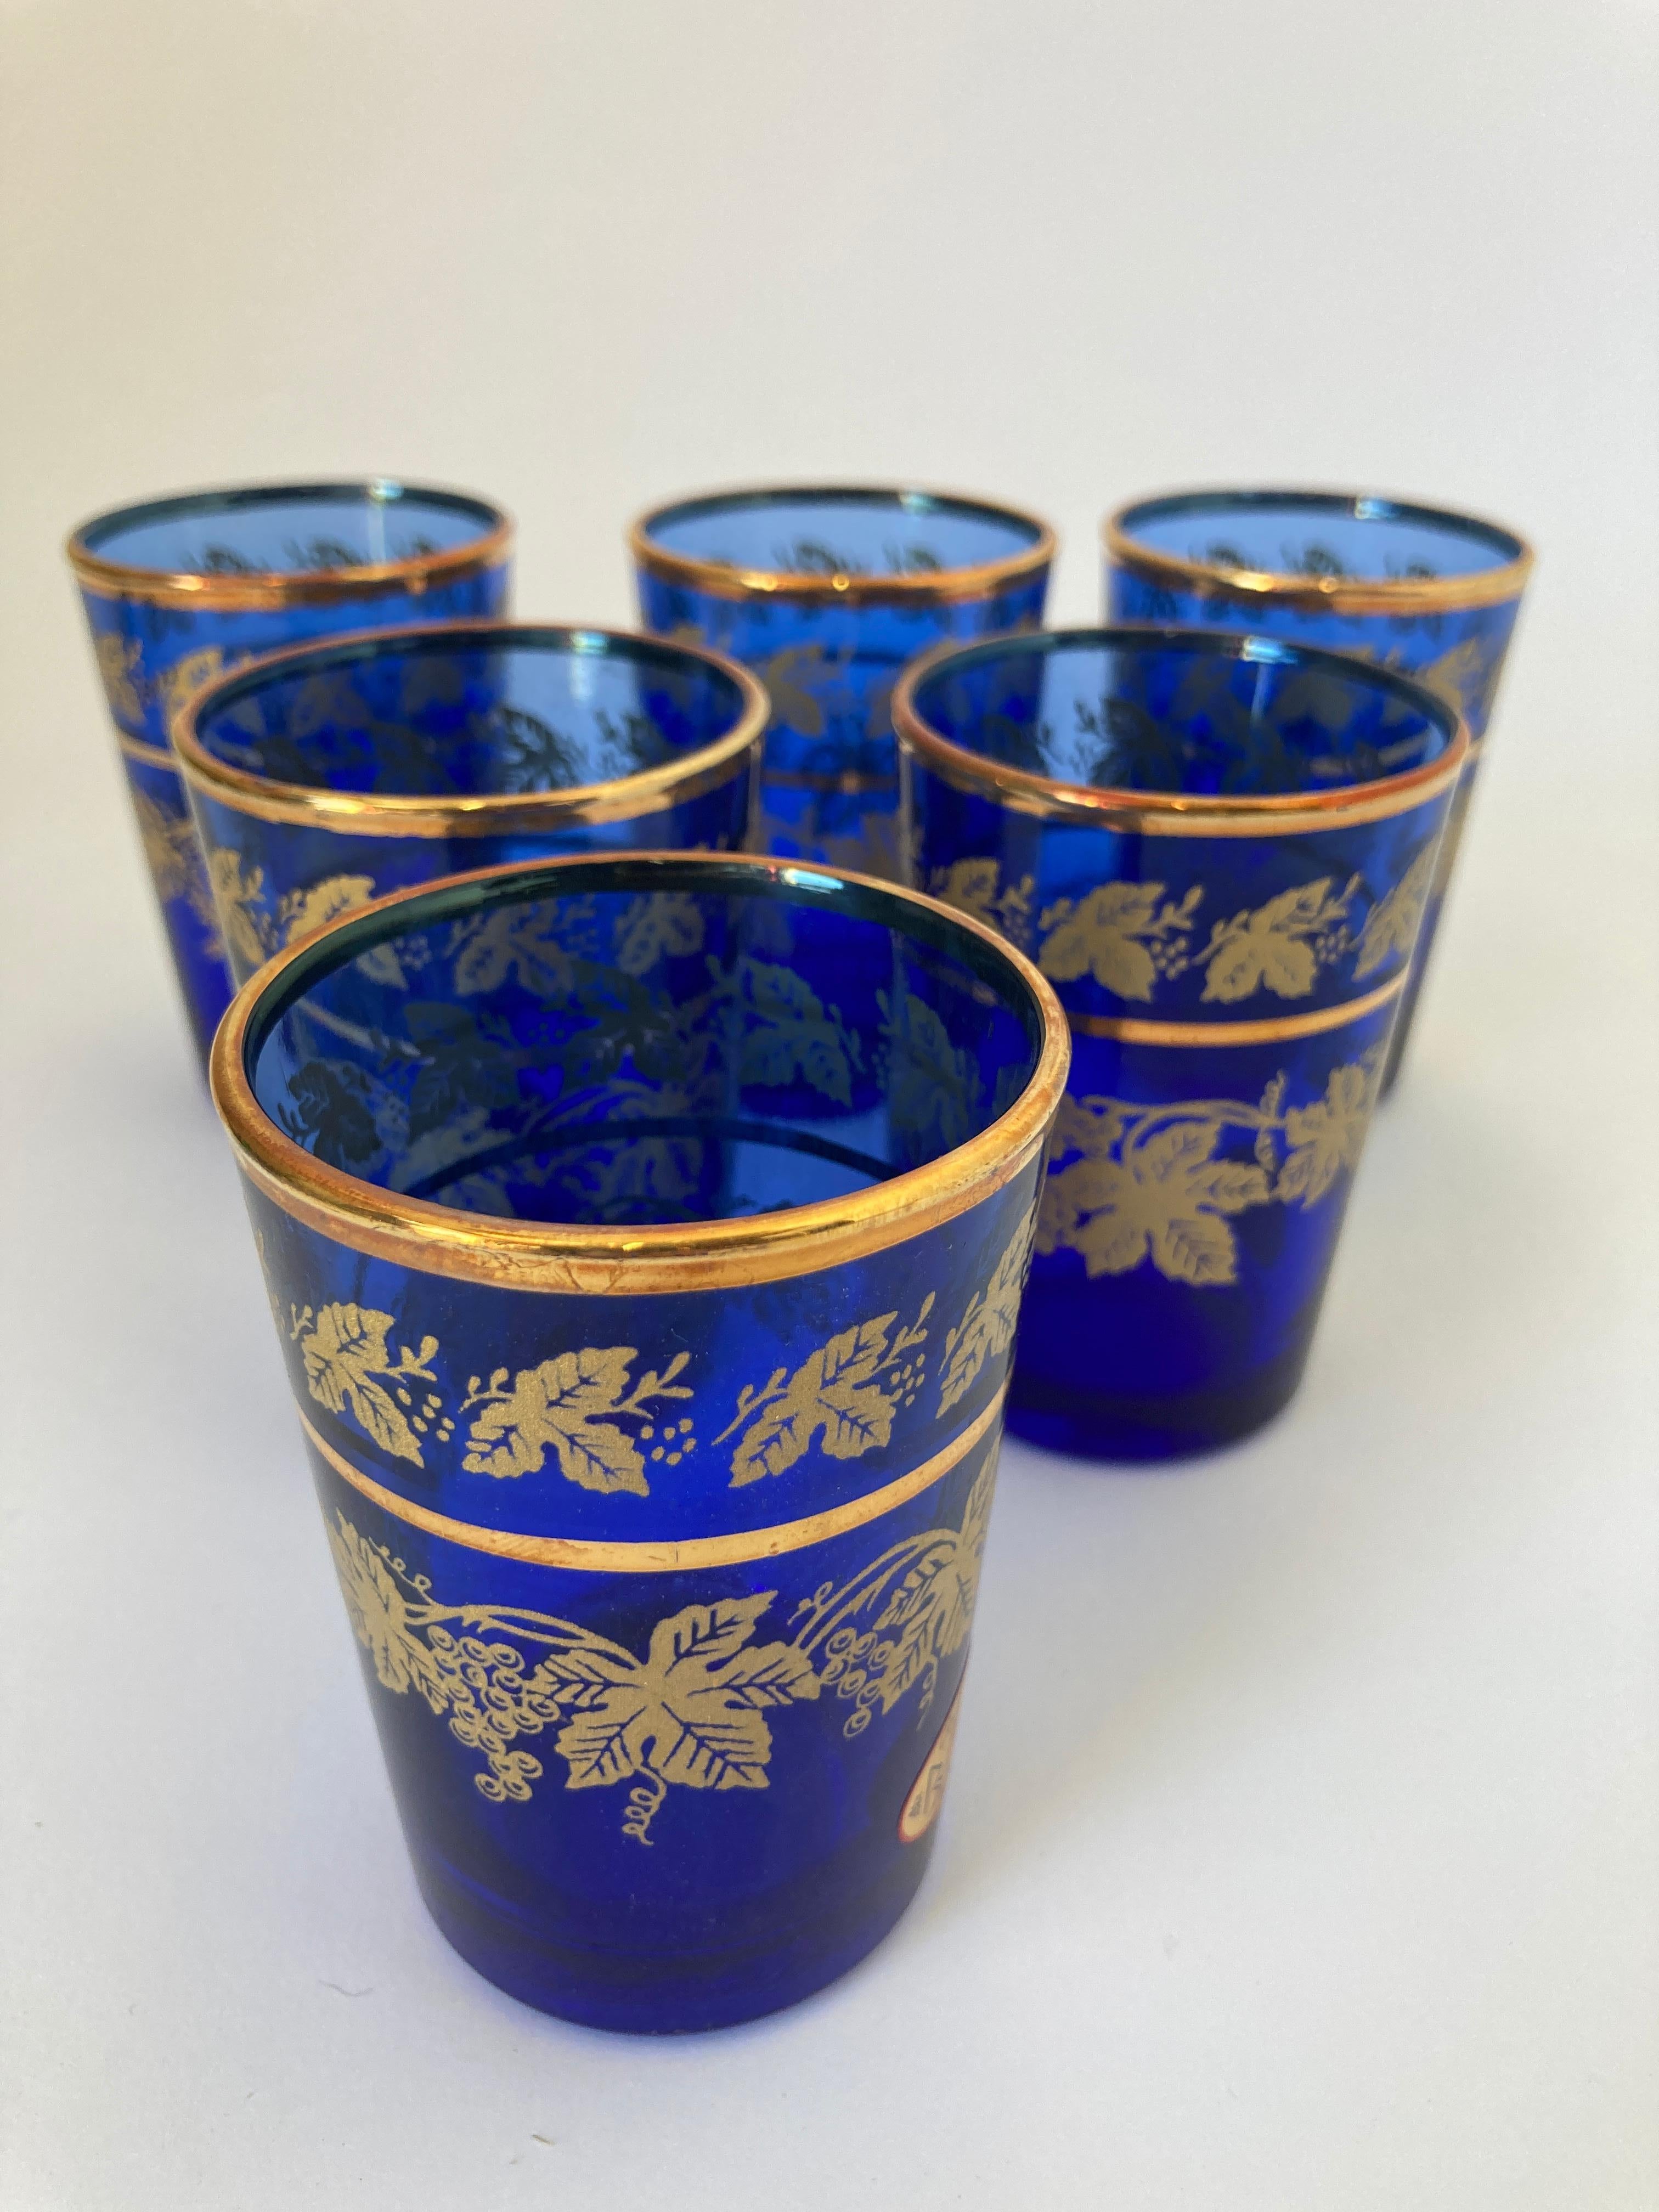 Set of six royal blue and gold handblown Moorish glasses.
Use them for Moroccan tea, or any hot or cold drink.
Shot glasses very light finely decorated with a classical gold pattern frieze. 
Use these elegant glasses for Moroccan tea, or any hot or